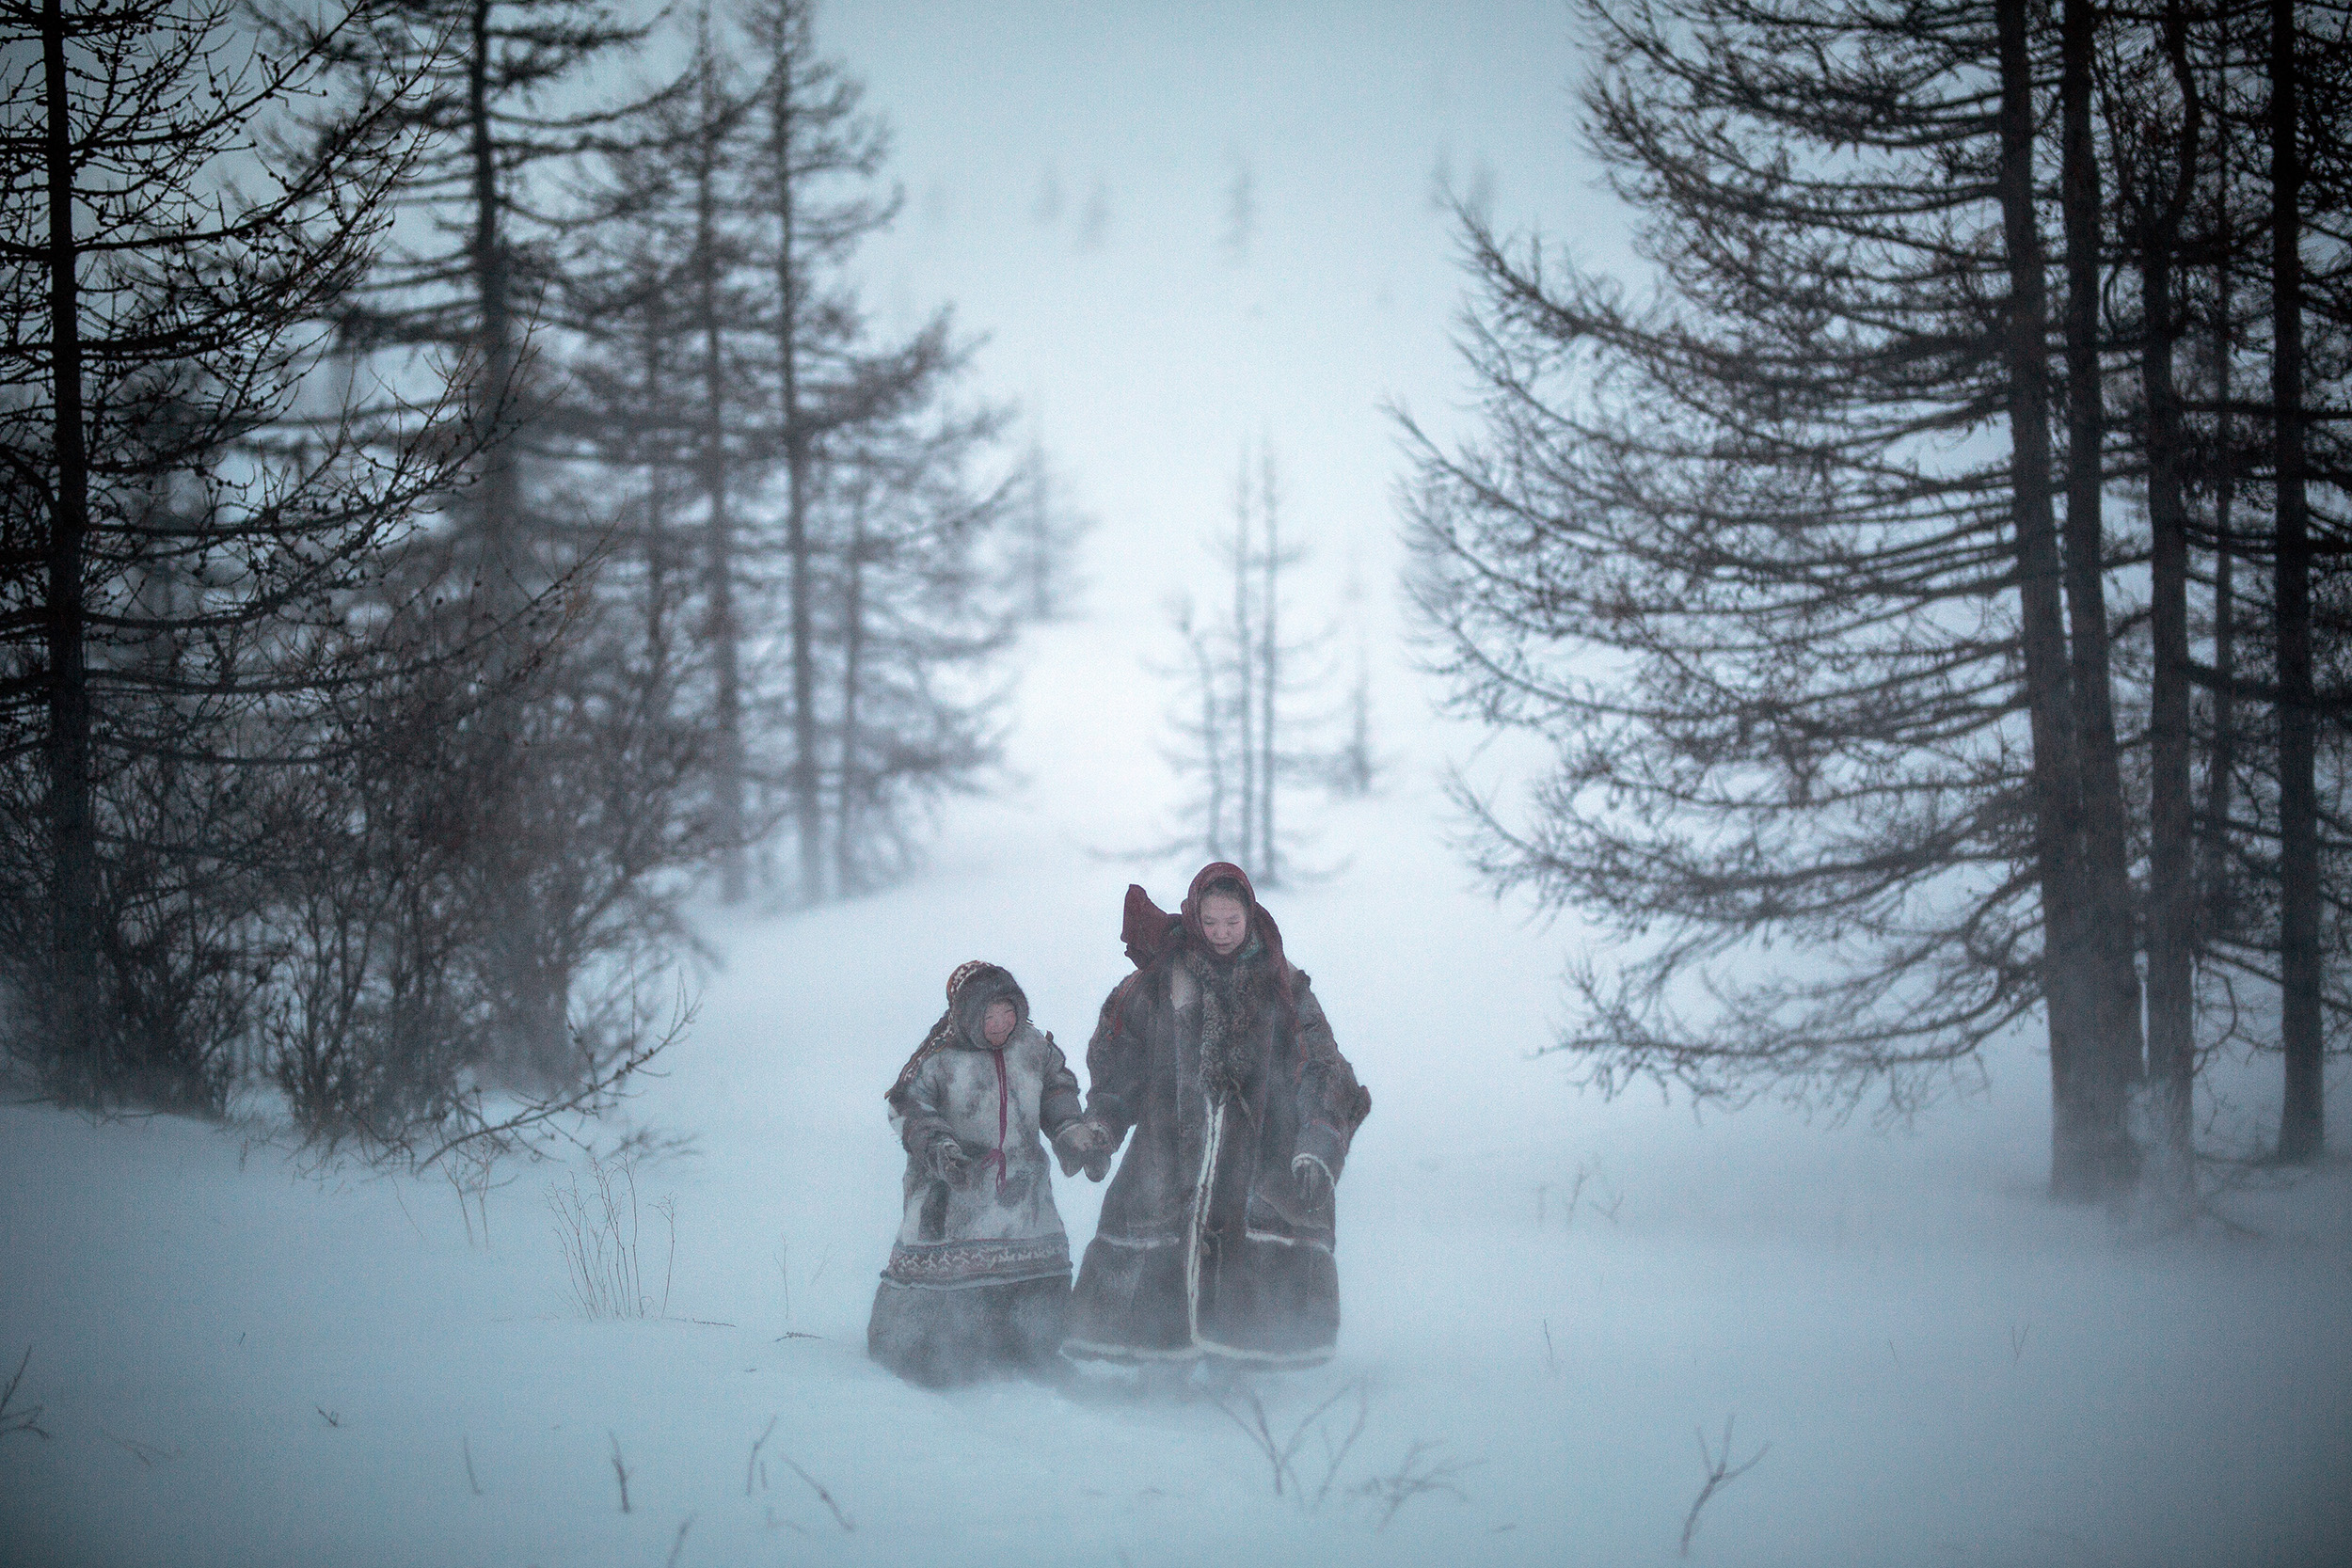 Storms, in winter season, are very frequent and Nenets protect themselves wearing thick and traditional reindeer skin coats.